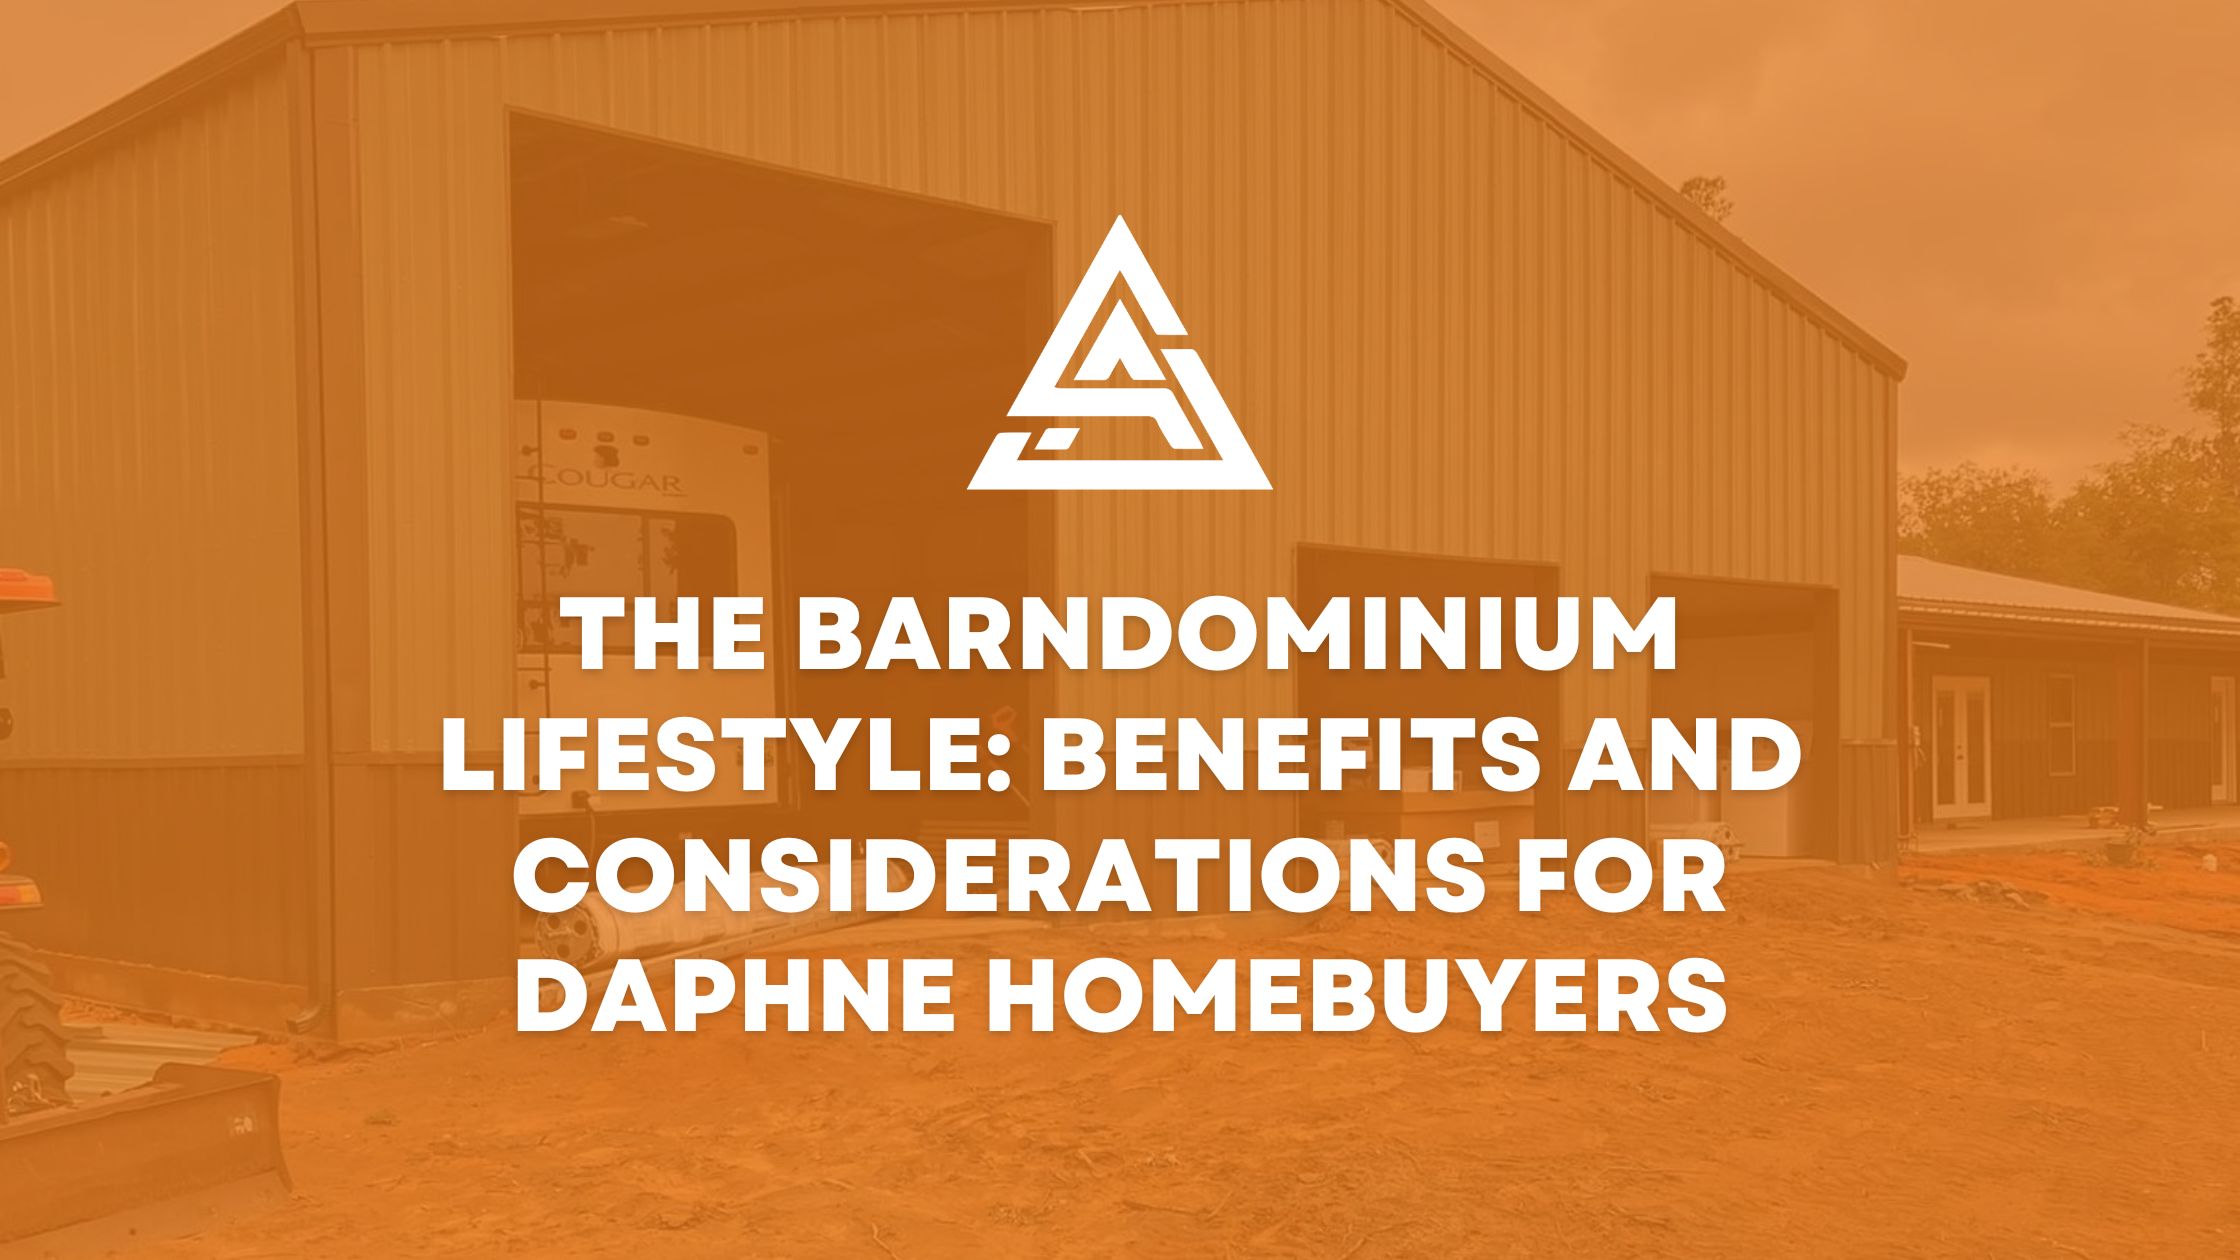 The Barndominium Lifestyle: Benefits and Considerations for Daphne Homebuyers